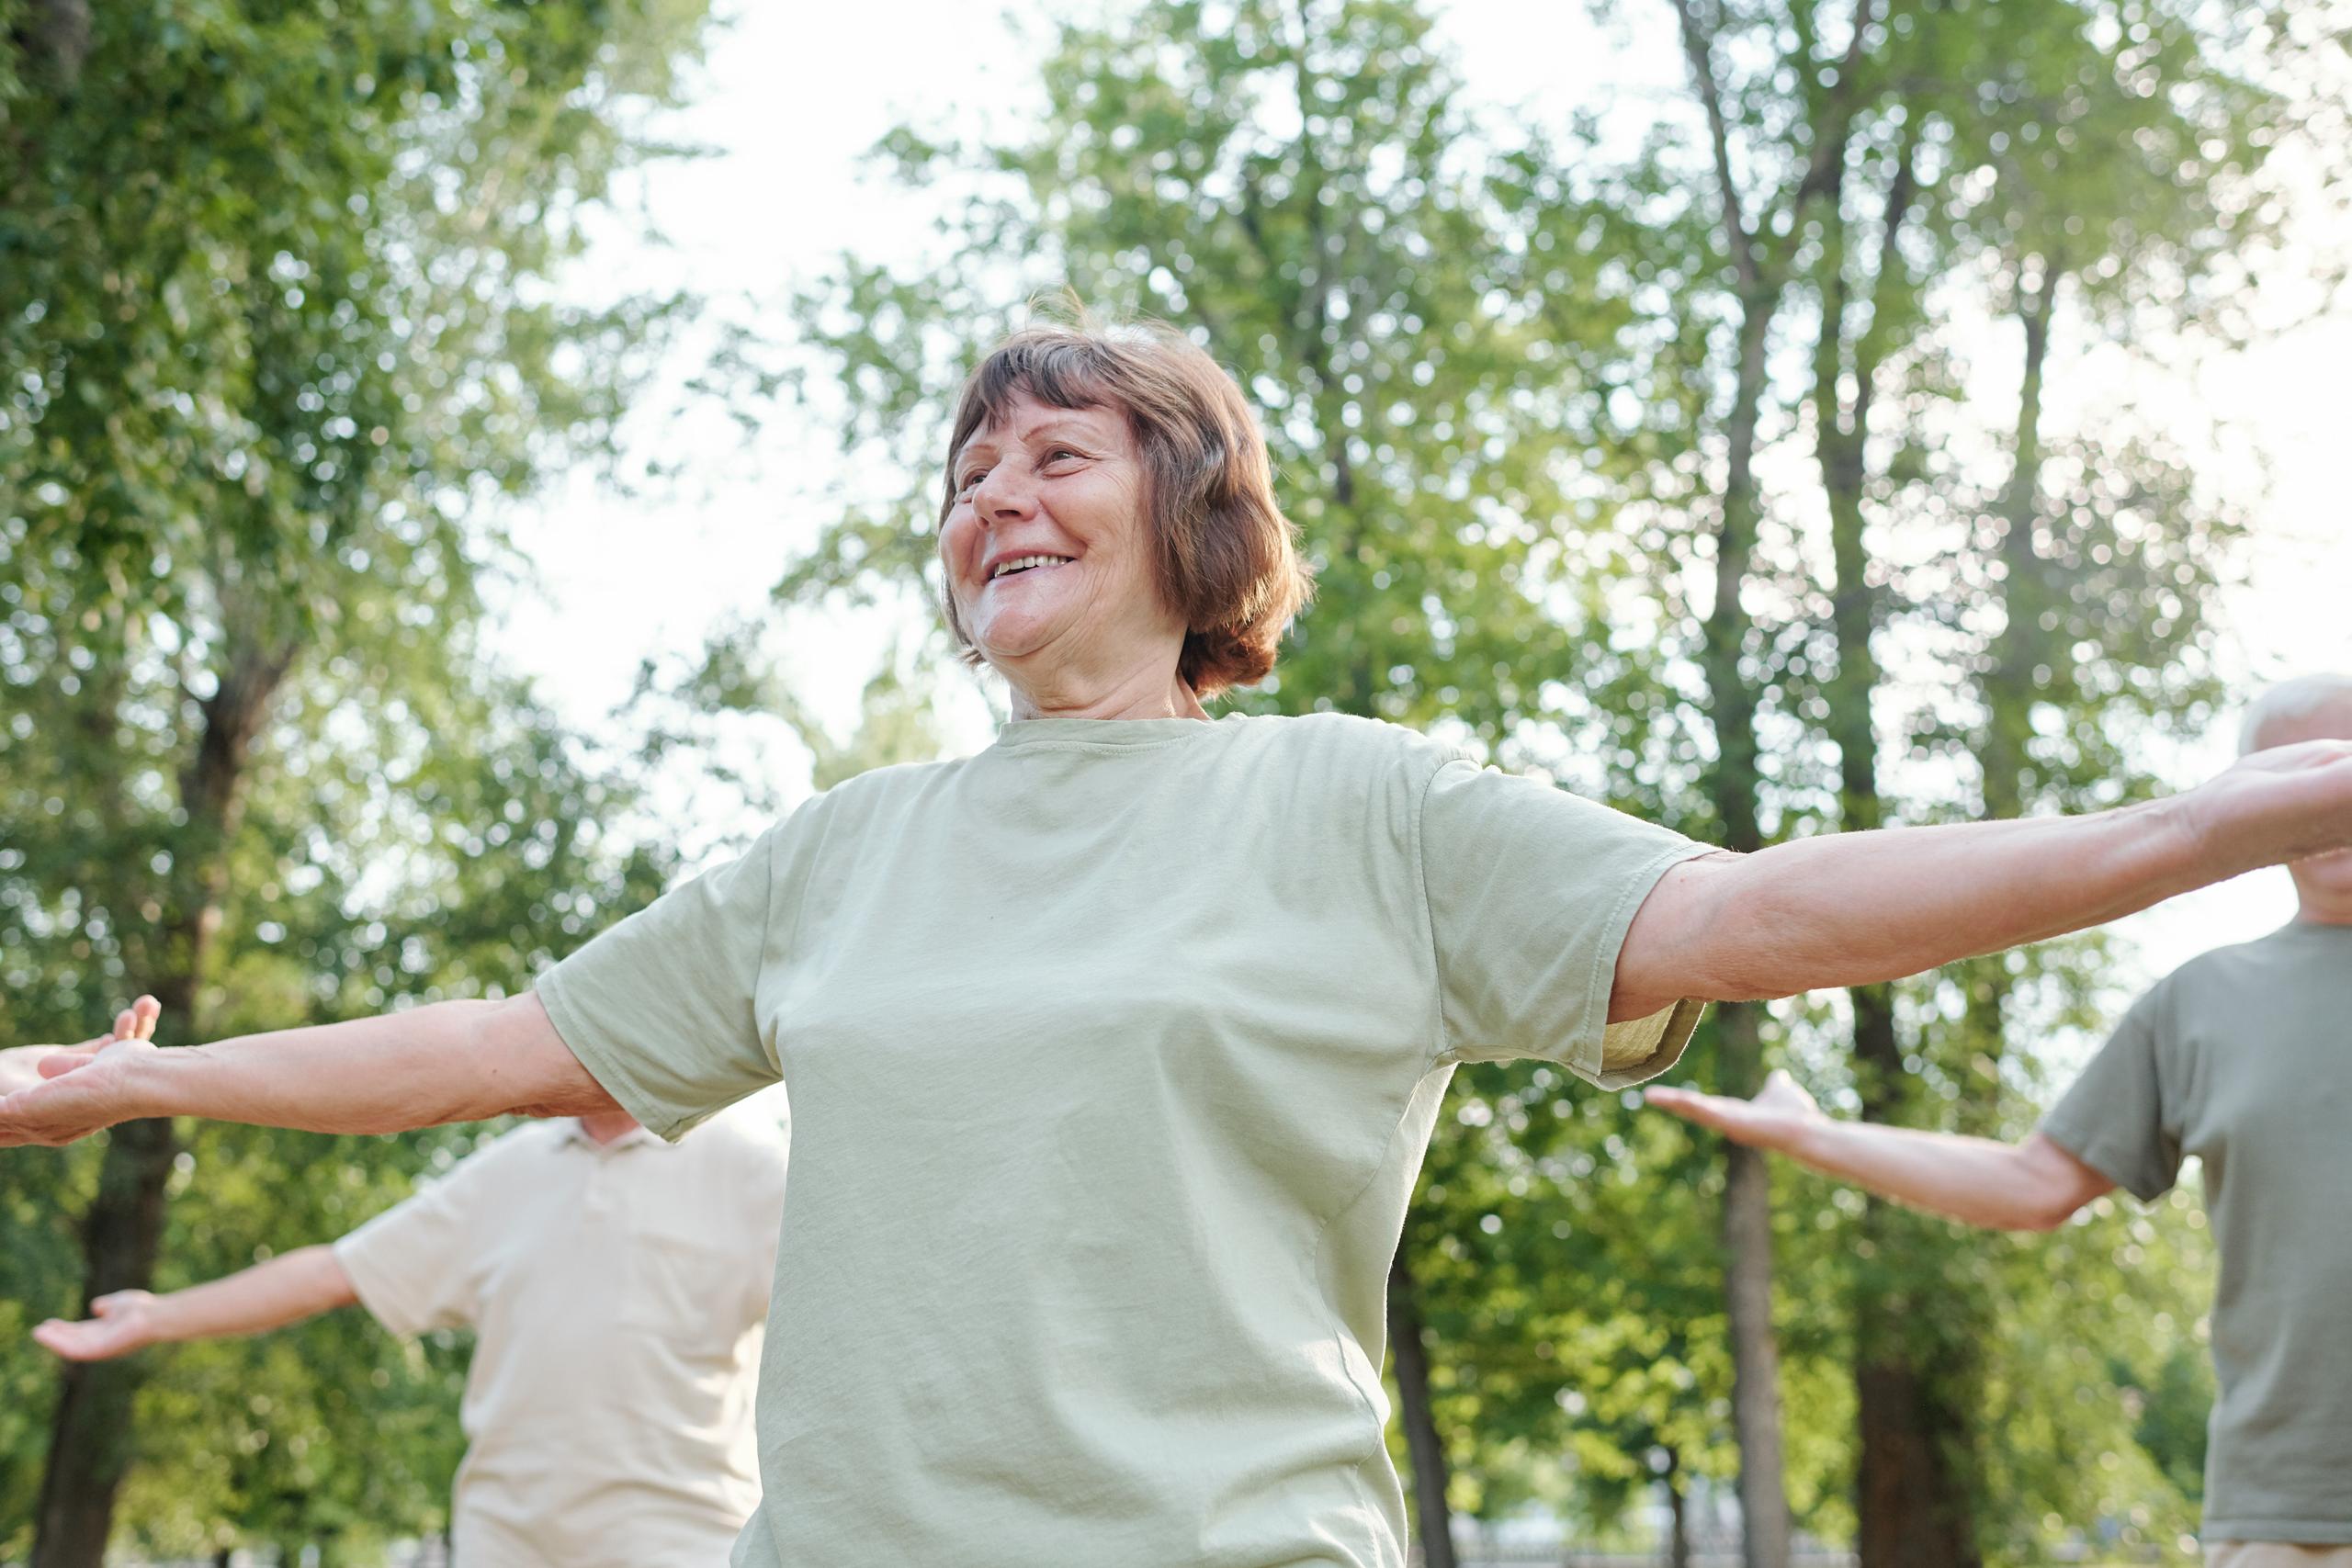 The Power of Community: Finding Connection Through Qigong Classes